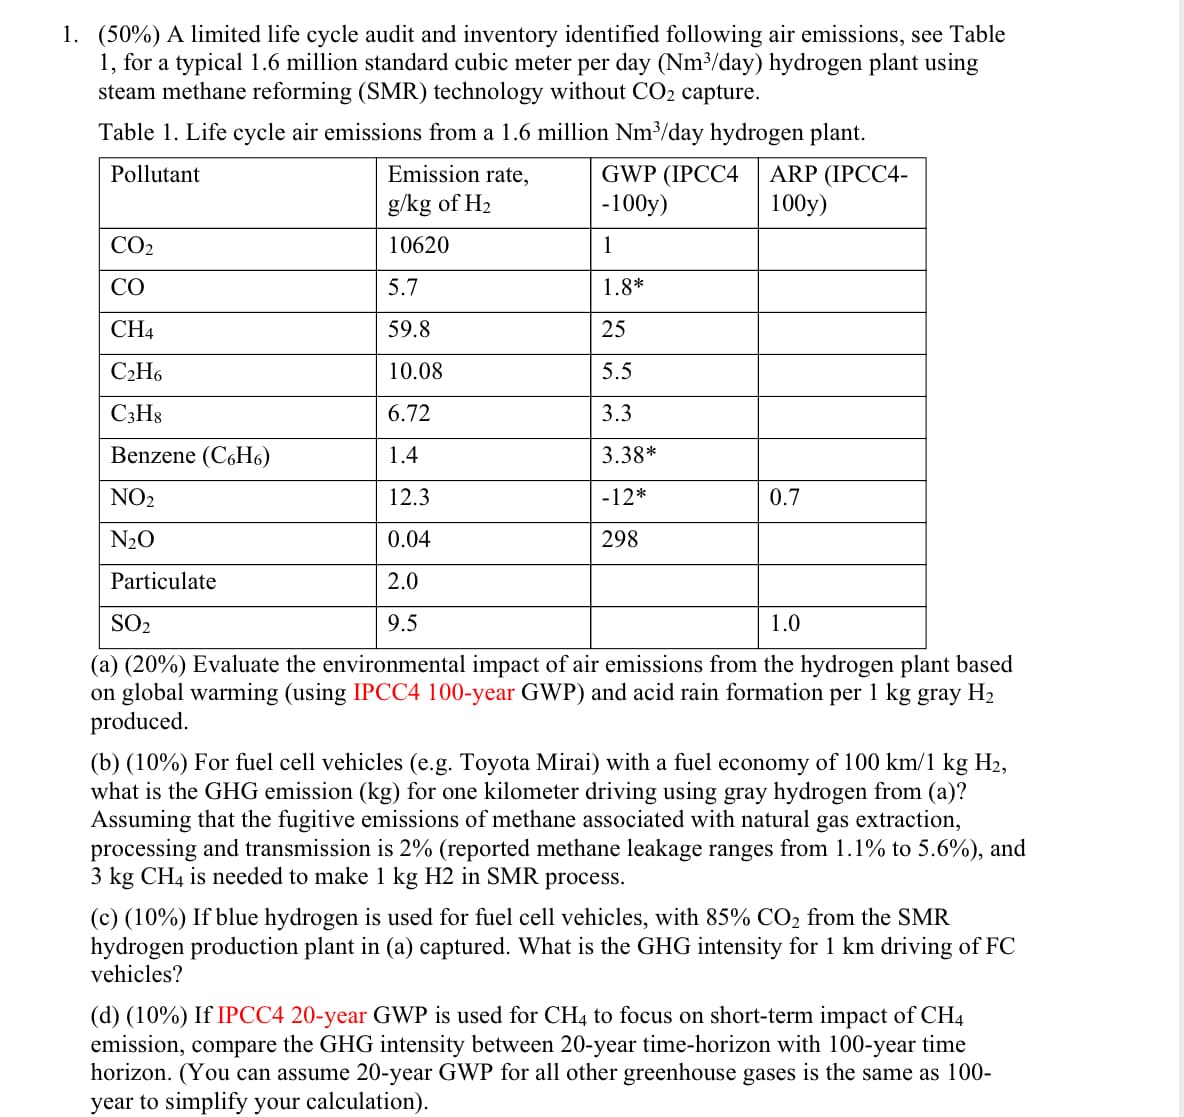 1. (50%) A limited life cycle audit and inventory identified following air emissions, see Table
1, for a typical 1.6 million standard cubic meter per day (Nm³/day) hydrogen plant using
steam methane reforming (SMR) technology without CO2 capture.
Table 1. Life cycle air emissions from a 1.6 million Nm³/day hydrogen plant.
Pollutant
Emission rate,
g/kg of H2
GWP (IPCC4
-100y)
ARP (IPCC4-
100y)
CO2
10620
1
CO
5.7
1.8*
CH4
59.8
25
C2H6
10.08
5.5
C3H8
6.72
3.3
Benzene (C6H6)
1.4
3.38*
NO2
12.3
-12*
0.7
N₂O
0.04
298
Particulate
2.0
SO2
9.5
1.0
(a) (20%) Evaluate the environmental impact of air emissions from the hydrogen plant based
on global warming (using IPCC4 100-year GWP) and acid rain formation per 1 kg gray H₂
produced.
(b) (10%) For fuel cell vehicles (e.g. Toyota Mirai) with a fuel economy of 100 km/1 kg H2,
what is the GHG emission (kg) for one kilometer driving using gray hydrogen from (a)?
Assuming that the fugitive emissions of methane associated with natural gas extraction,
processing and transmission is 2% (reported methane leakage ranges from 1.1% to 5.6%), and
3 kg CH4 is needed to make 1 kg H2 in SMR process.
(c) (10%) If blue hydrogen is used for fuel cell vehicles, with 85% CO2 from the SMR
hydrogen production plant in (a) captured. What is the GHG intensity for 1 km driving of FC
vehicles?
(d) (10%) If IPCC4 20-year GWP is used for CH4 to focus on short-term impact of CH4
emission, compare the GHG intensity between 20-year time-horizon with 100-year time
horizon. (You can assume 20-year GWP for all other greenhouse gases is the same as 100-
year to simplify your calculation).